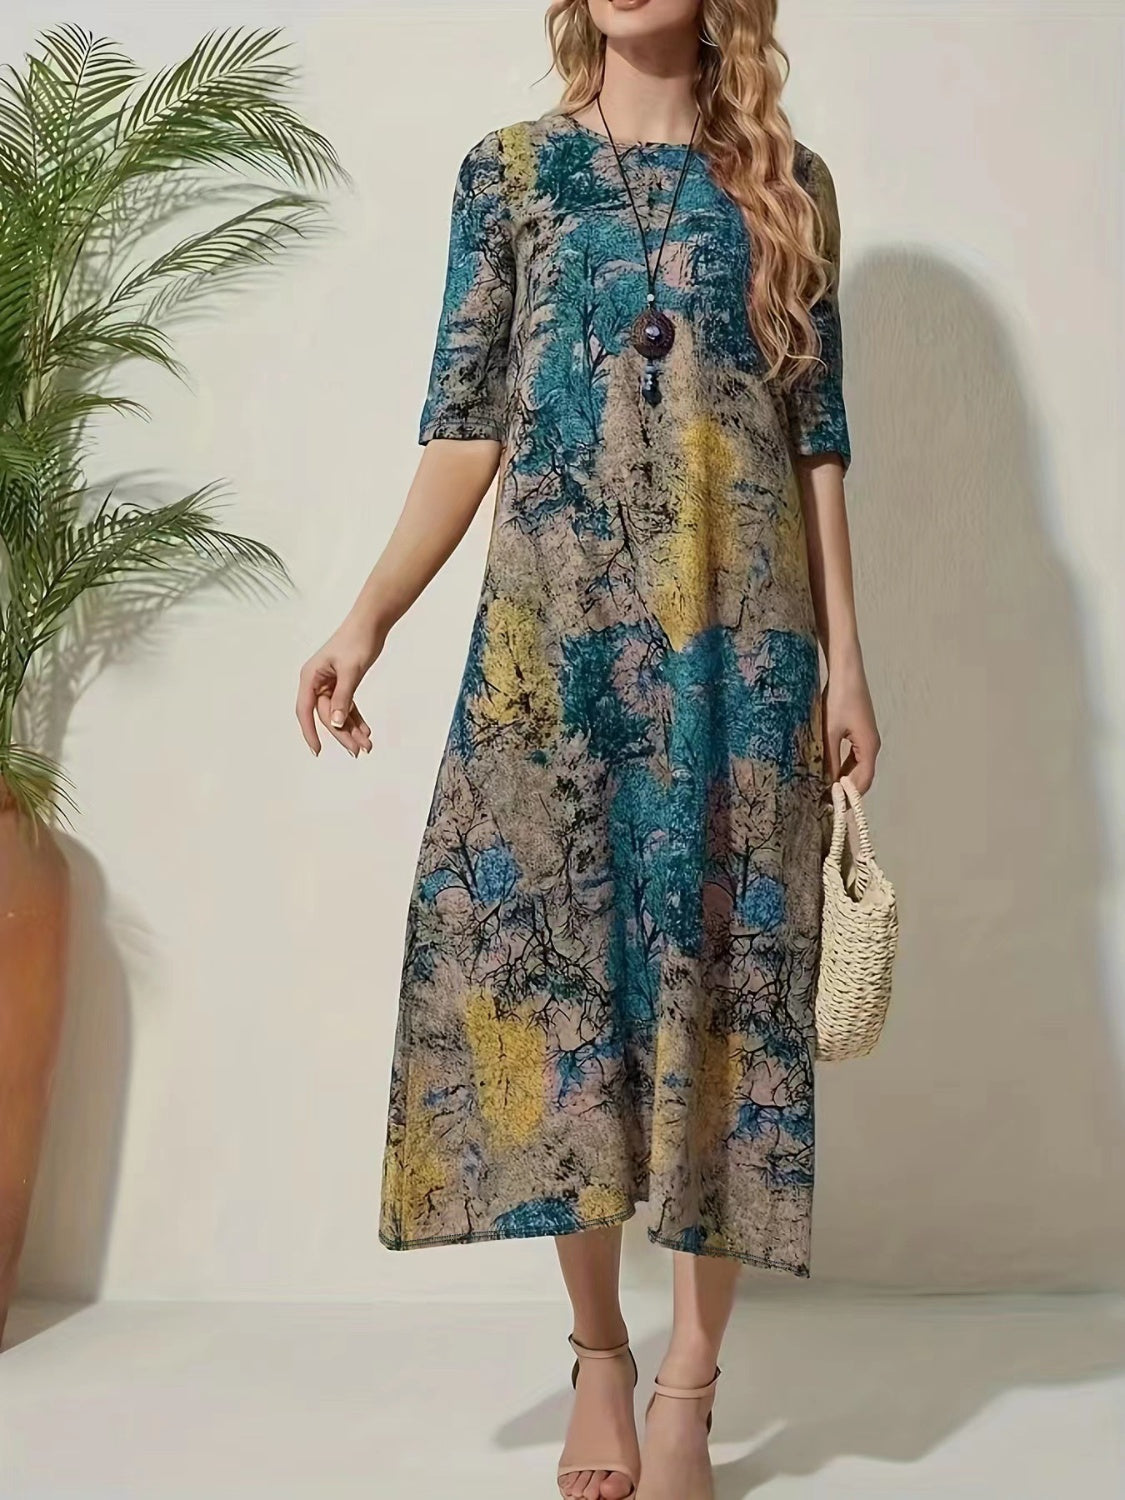 Elegant Summer Beach Wedding Guest Midi Dress for Women Over 50, Full Size Printed Half Sleeve, Perfect for Parties